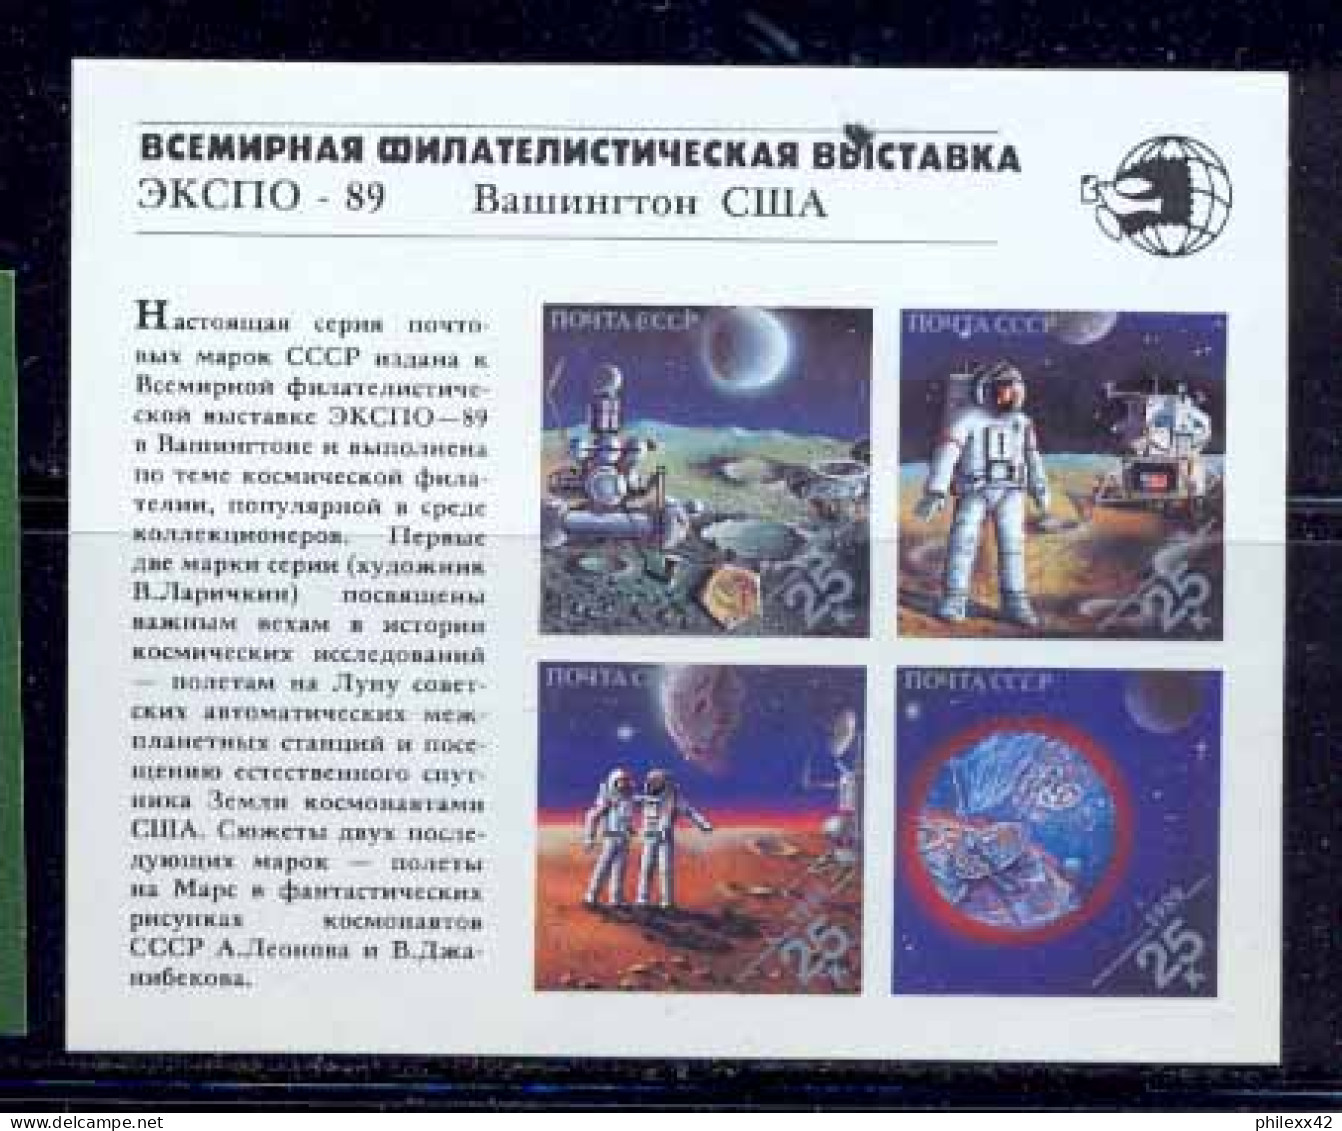 Russie (Russia Urss USSR) - 186c - Bloc N°209 Espace (space) World Stamps Expo 89 Non Dentelé (imperforate) - Russie & URSS